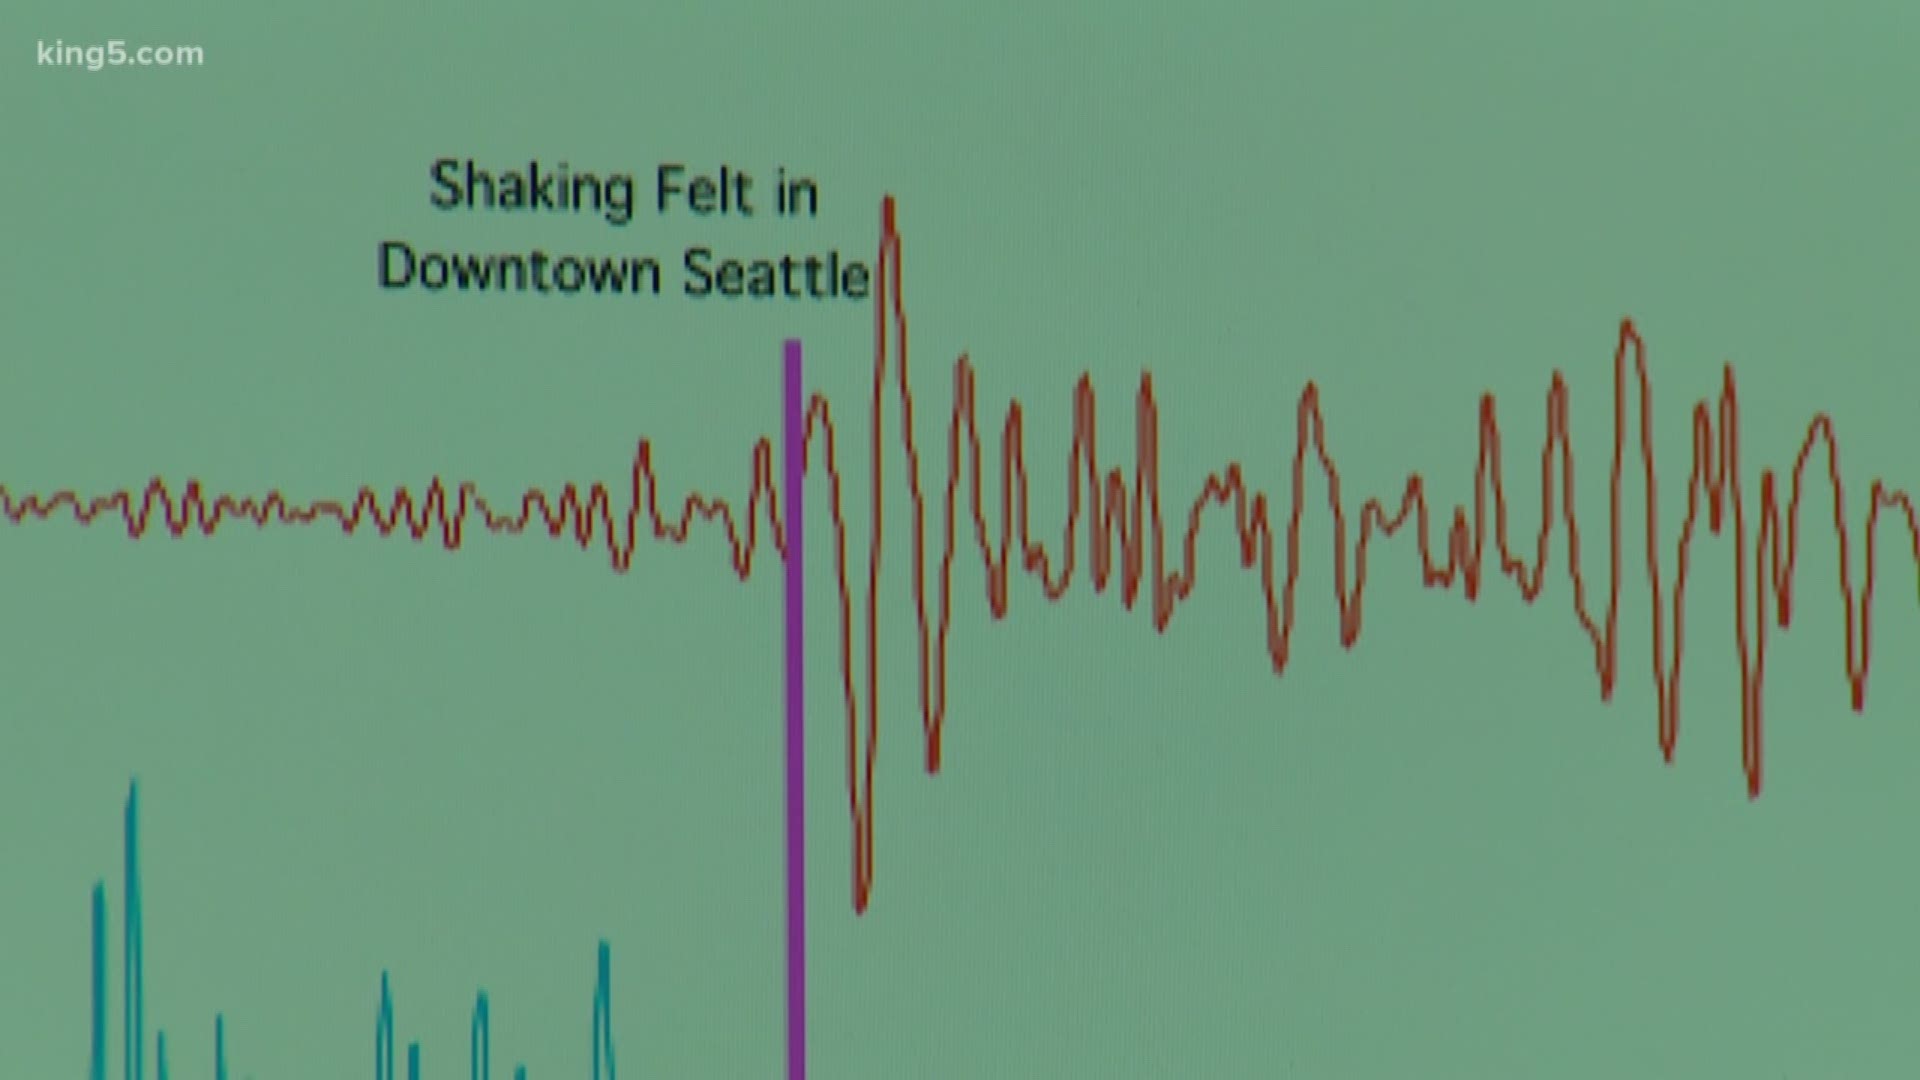 The 4.6 earthquake in Monroe was the first real test of Washington’s ShakeAlert early warning system. An app for public use is currently in the works.